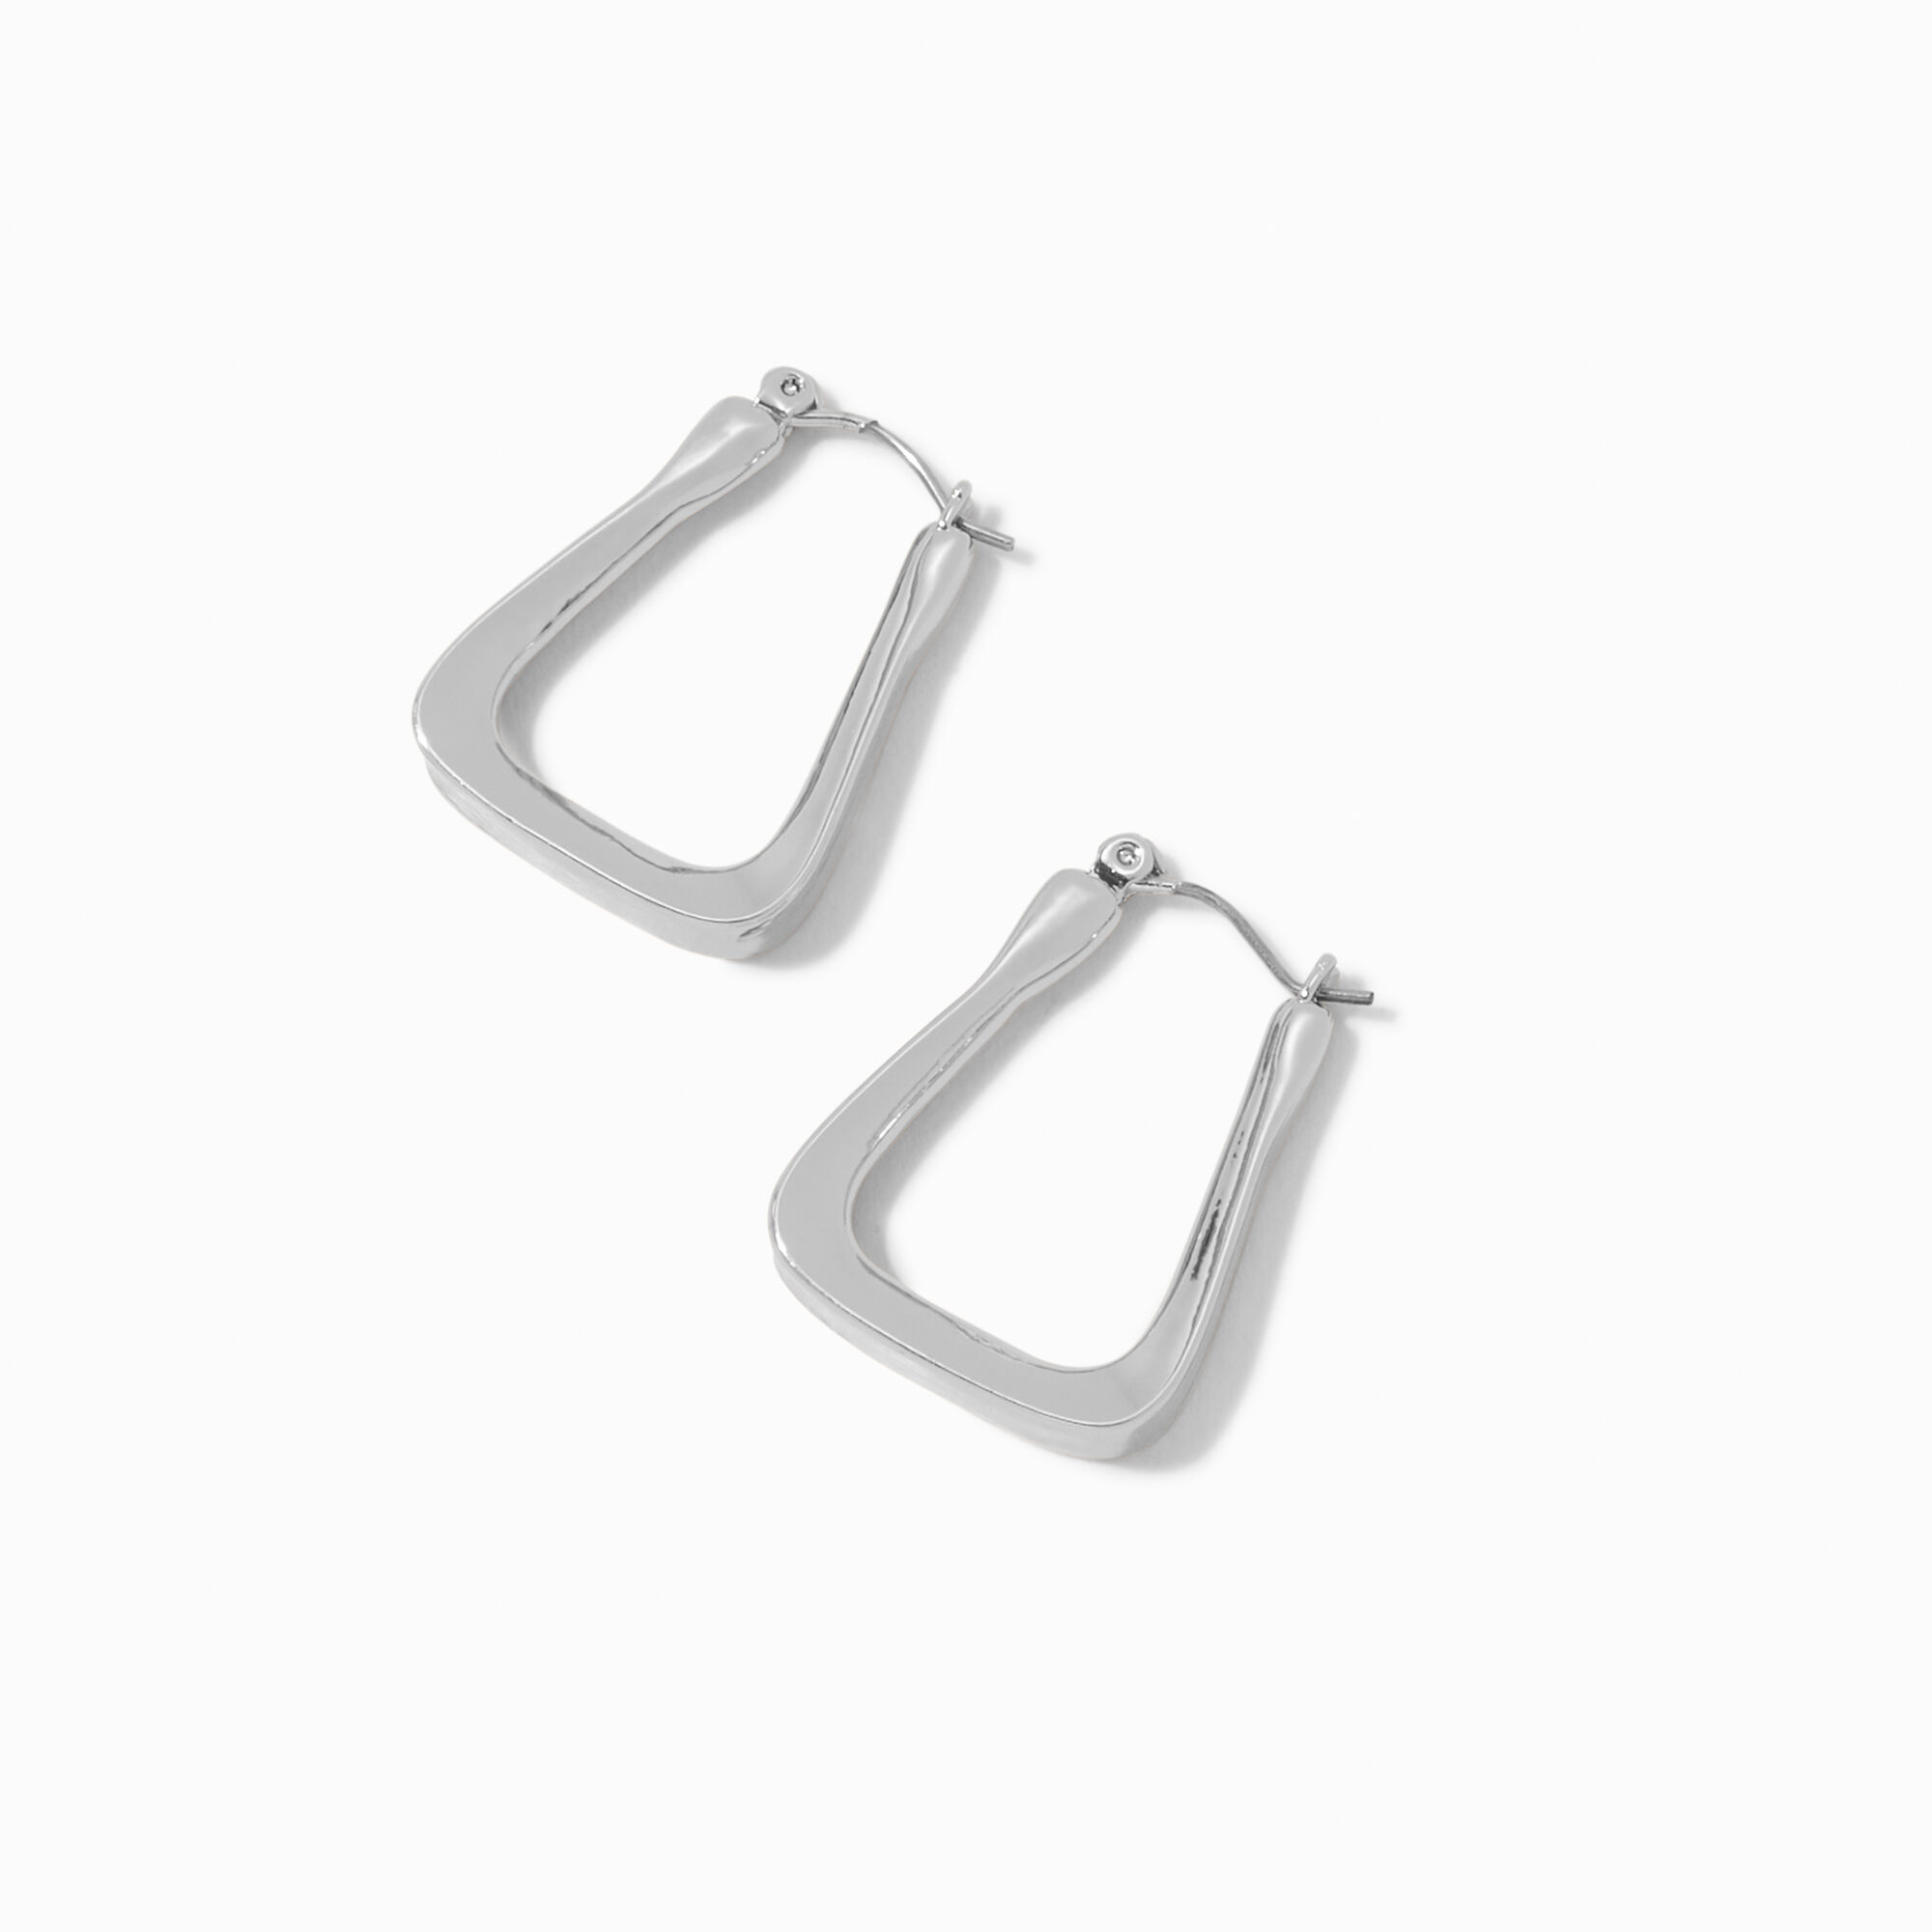 View Claires Tone Triangular Oval 30MM Hoop Earrings Silver information